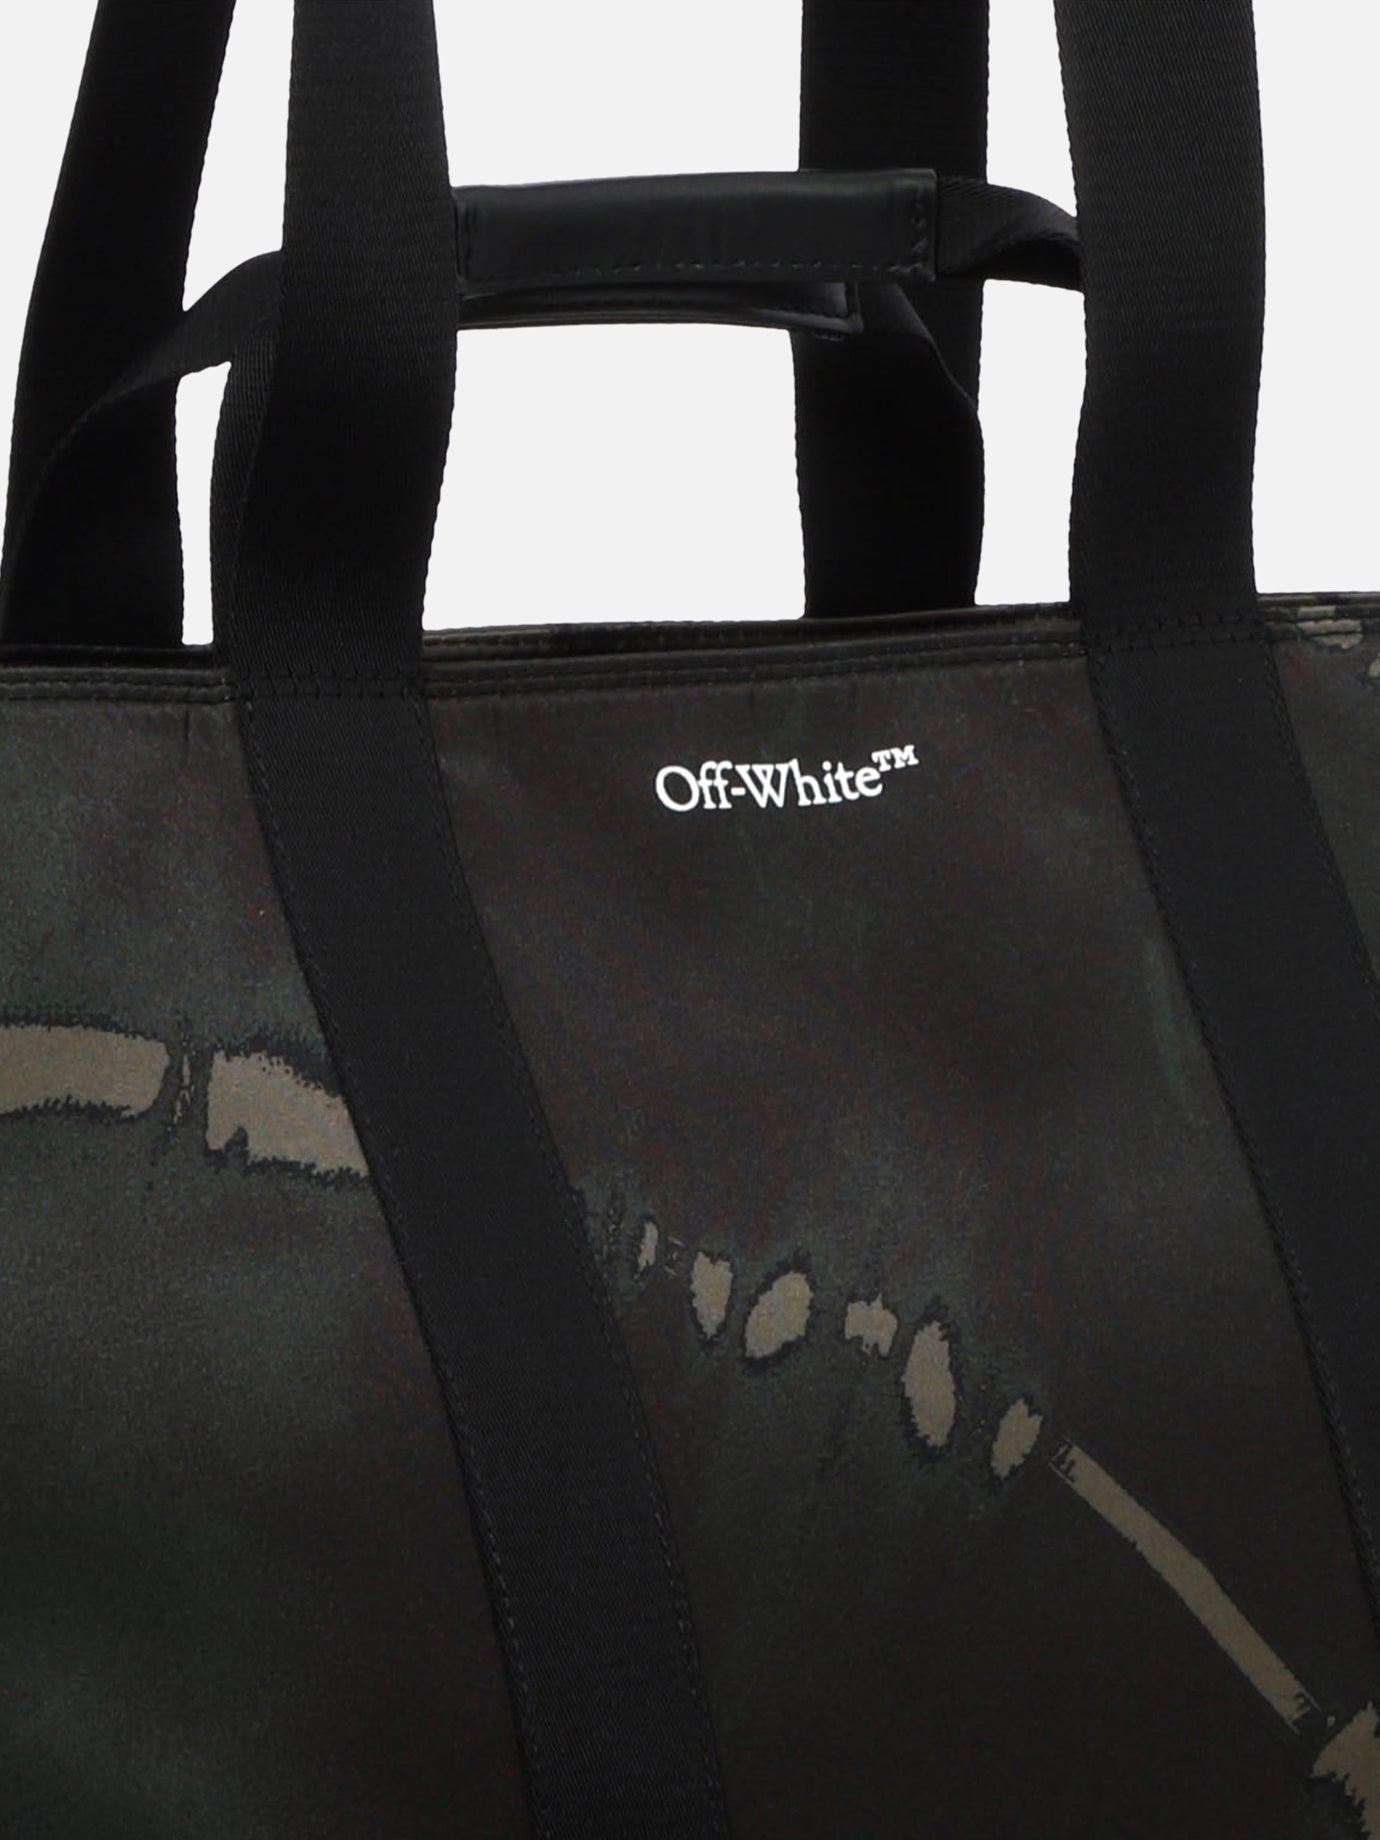 "Commercial" tote bag